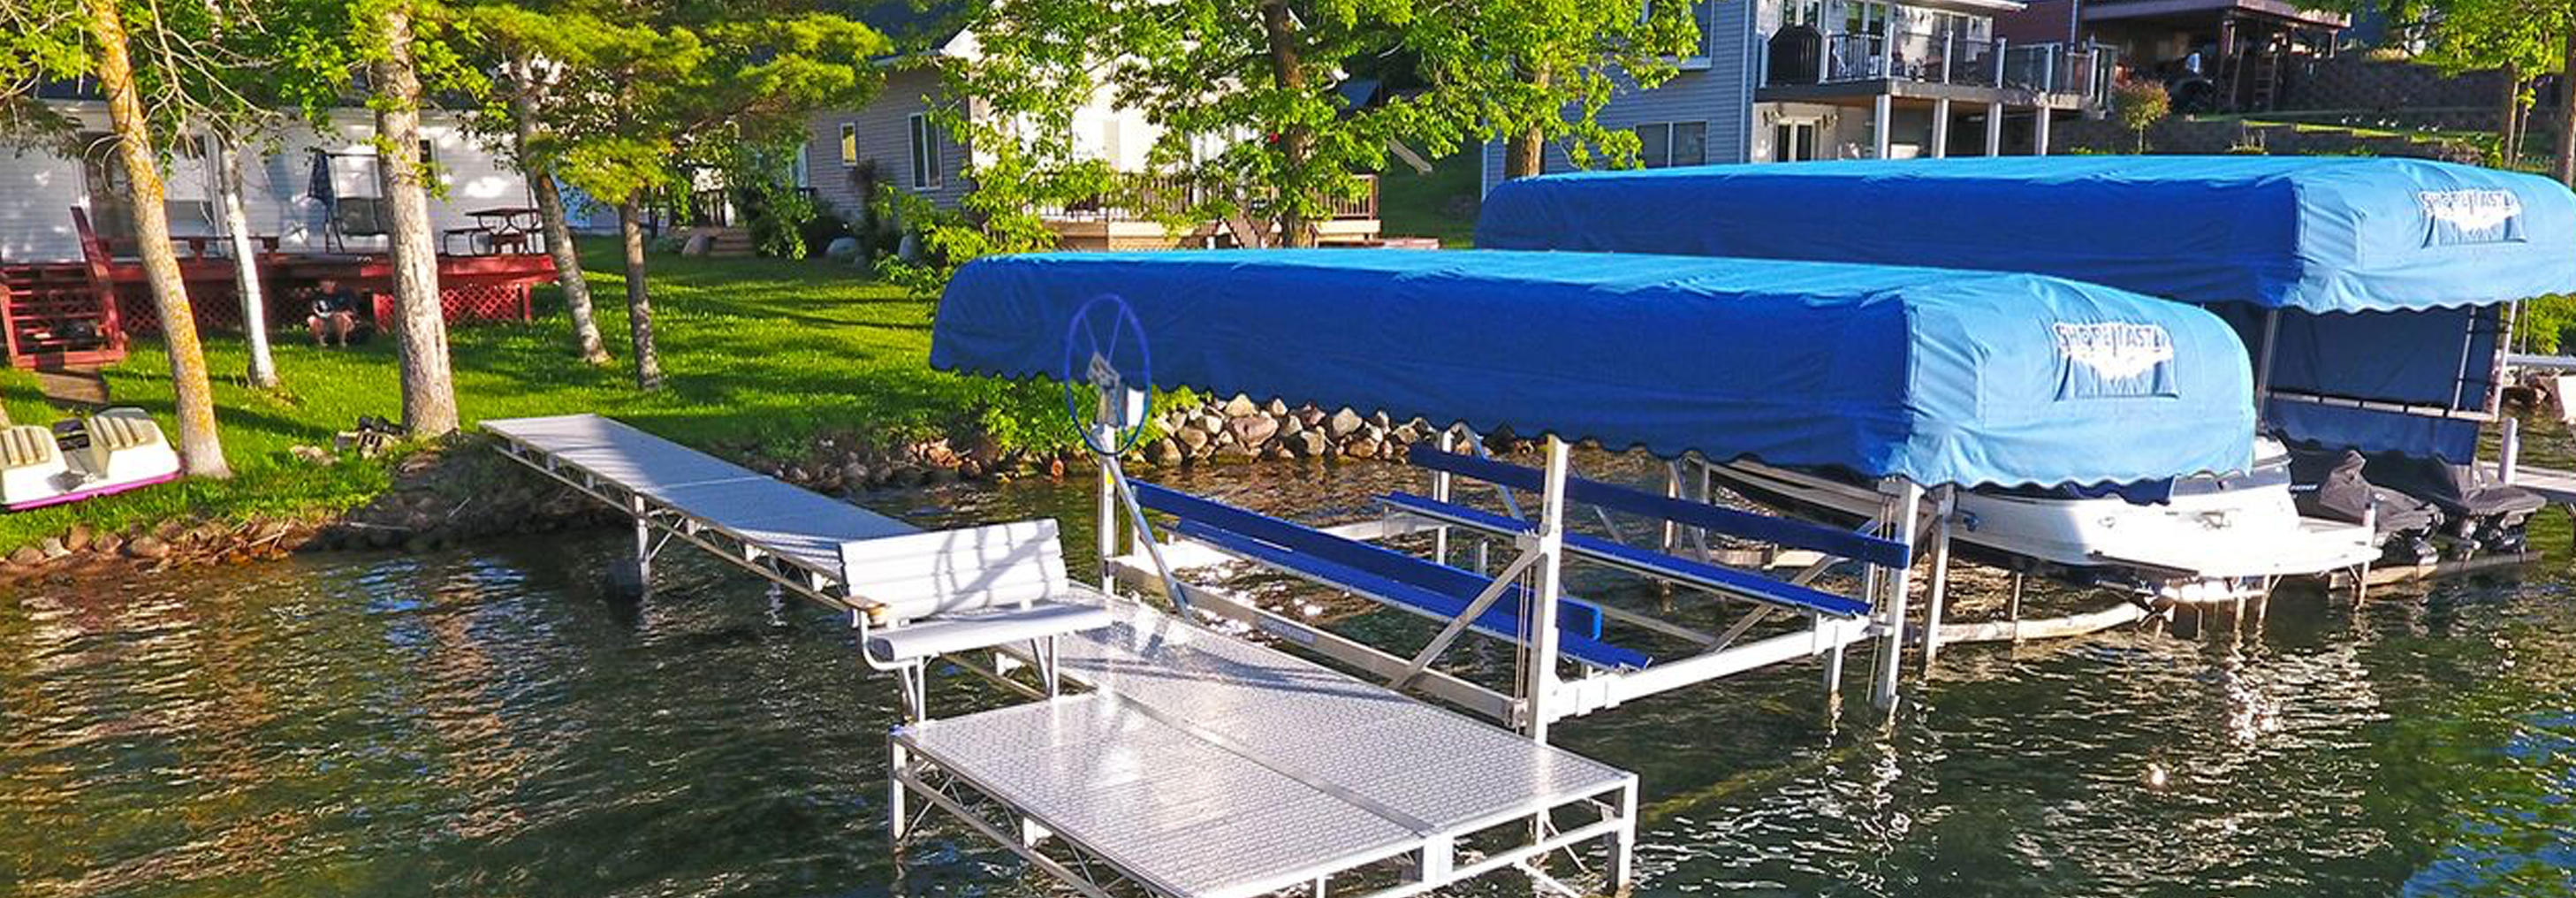 Versatile boat lifts for any watercraft